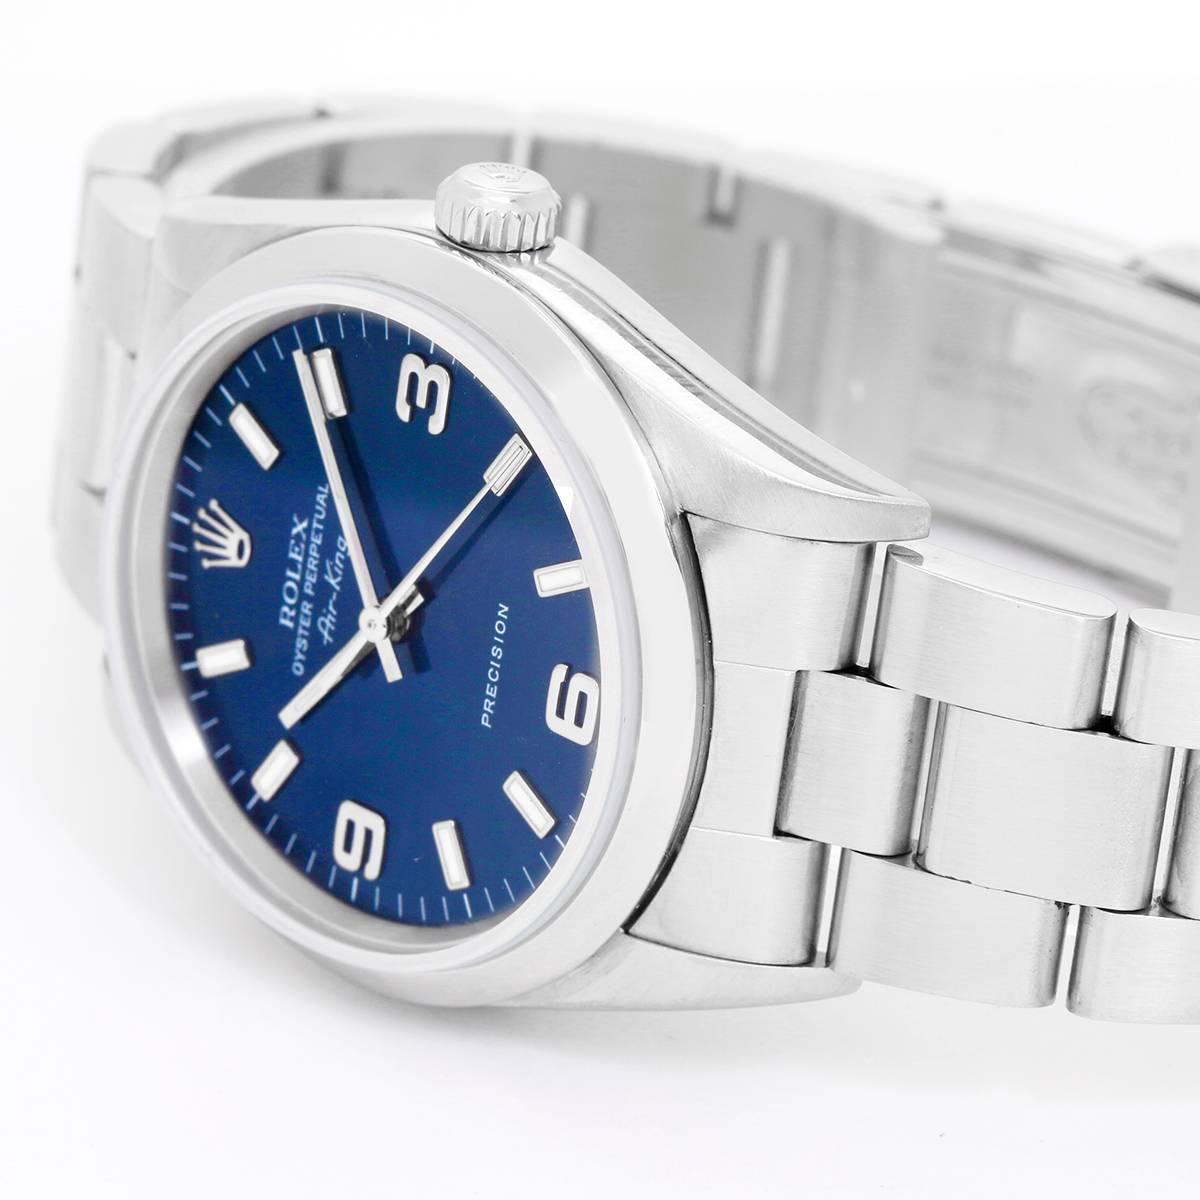 Rolex Air-King Men's Stainless Steel Watch Blue Dial 14000 -  Automatic winding, 27 jewels, no-date, sapphire crystal. Stainless steel case with smooth bezel (33mm diameter). Blue dial with luminous style markers and Arabic numerals. Stainless steel